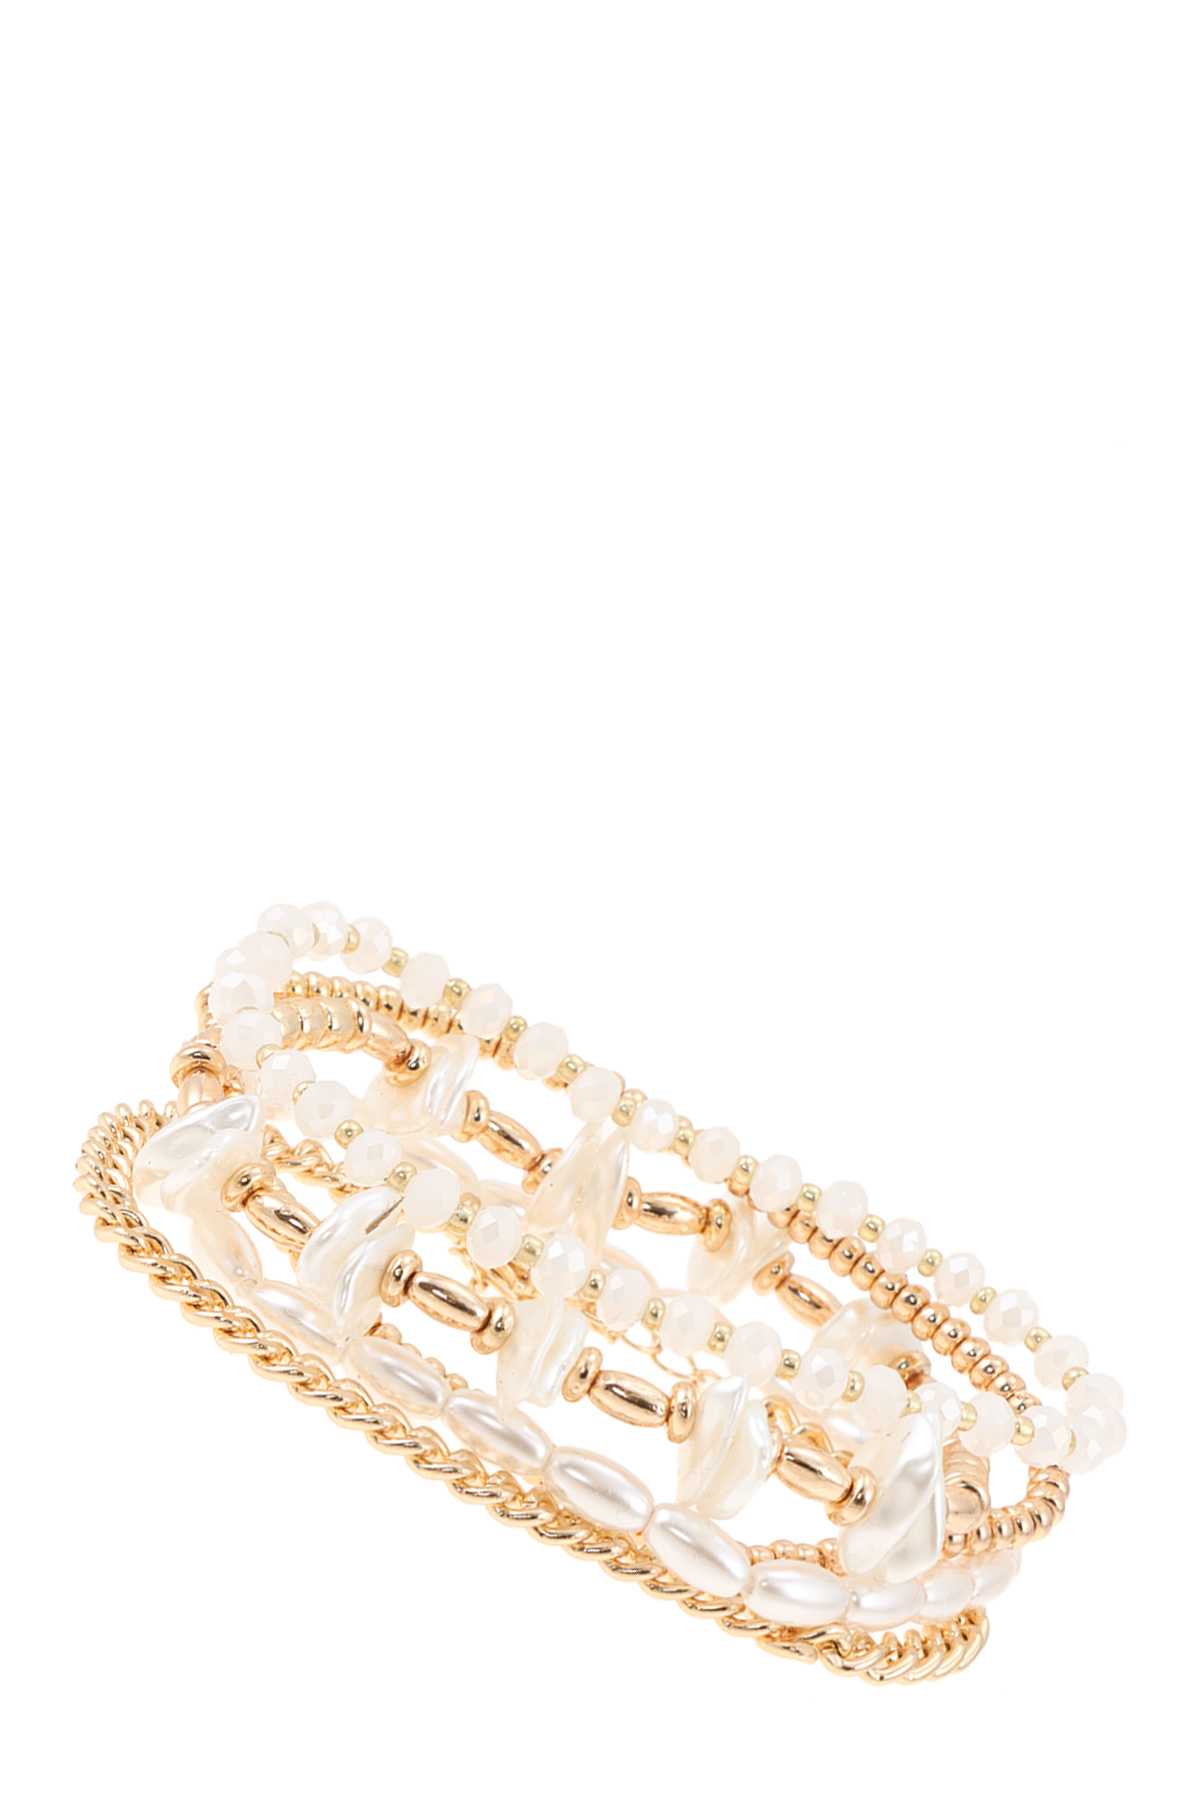 Pearl and Beads Linked Layered Bracelet